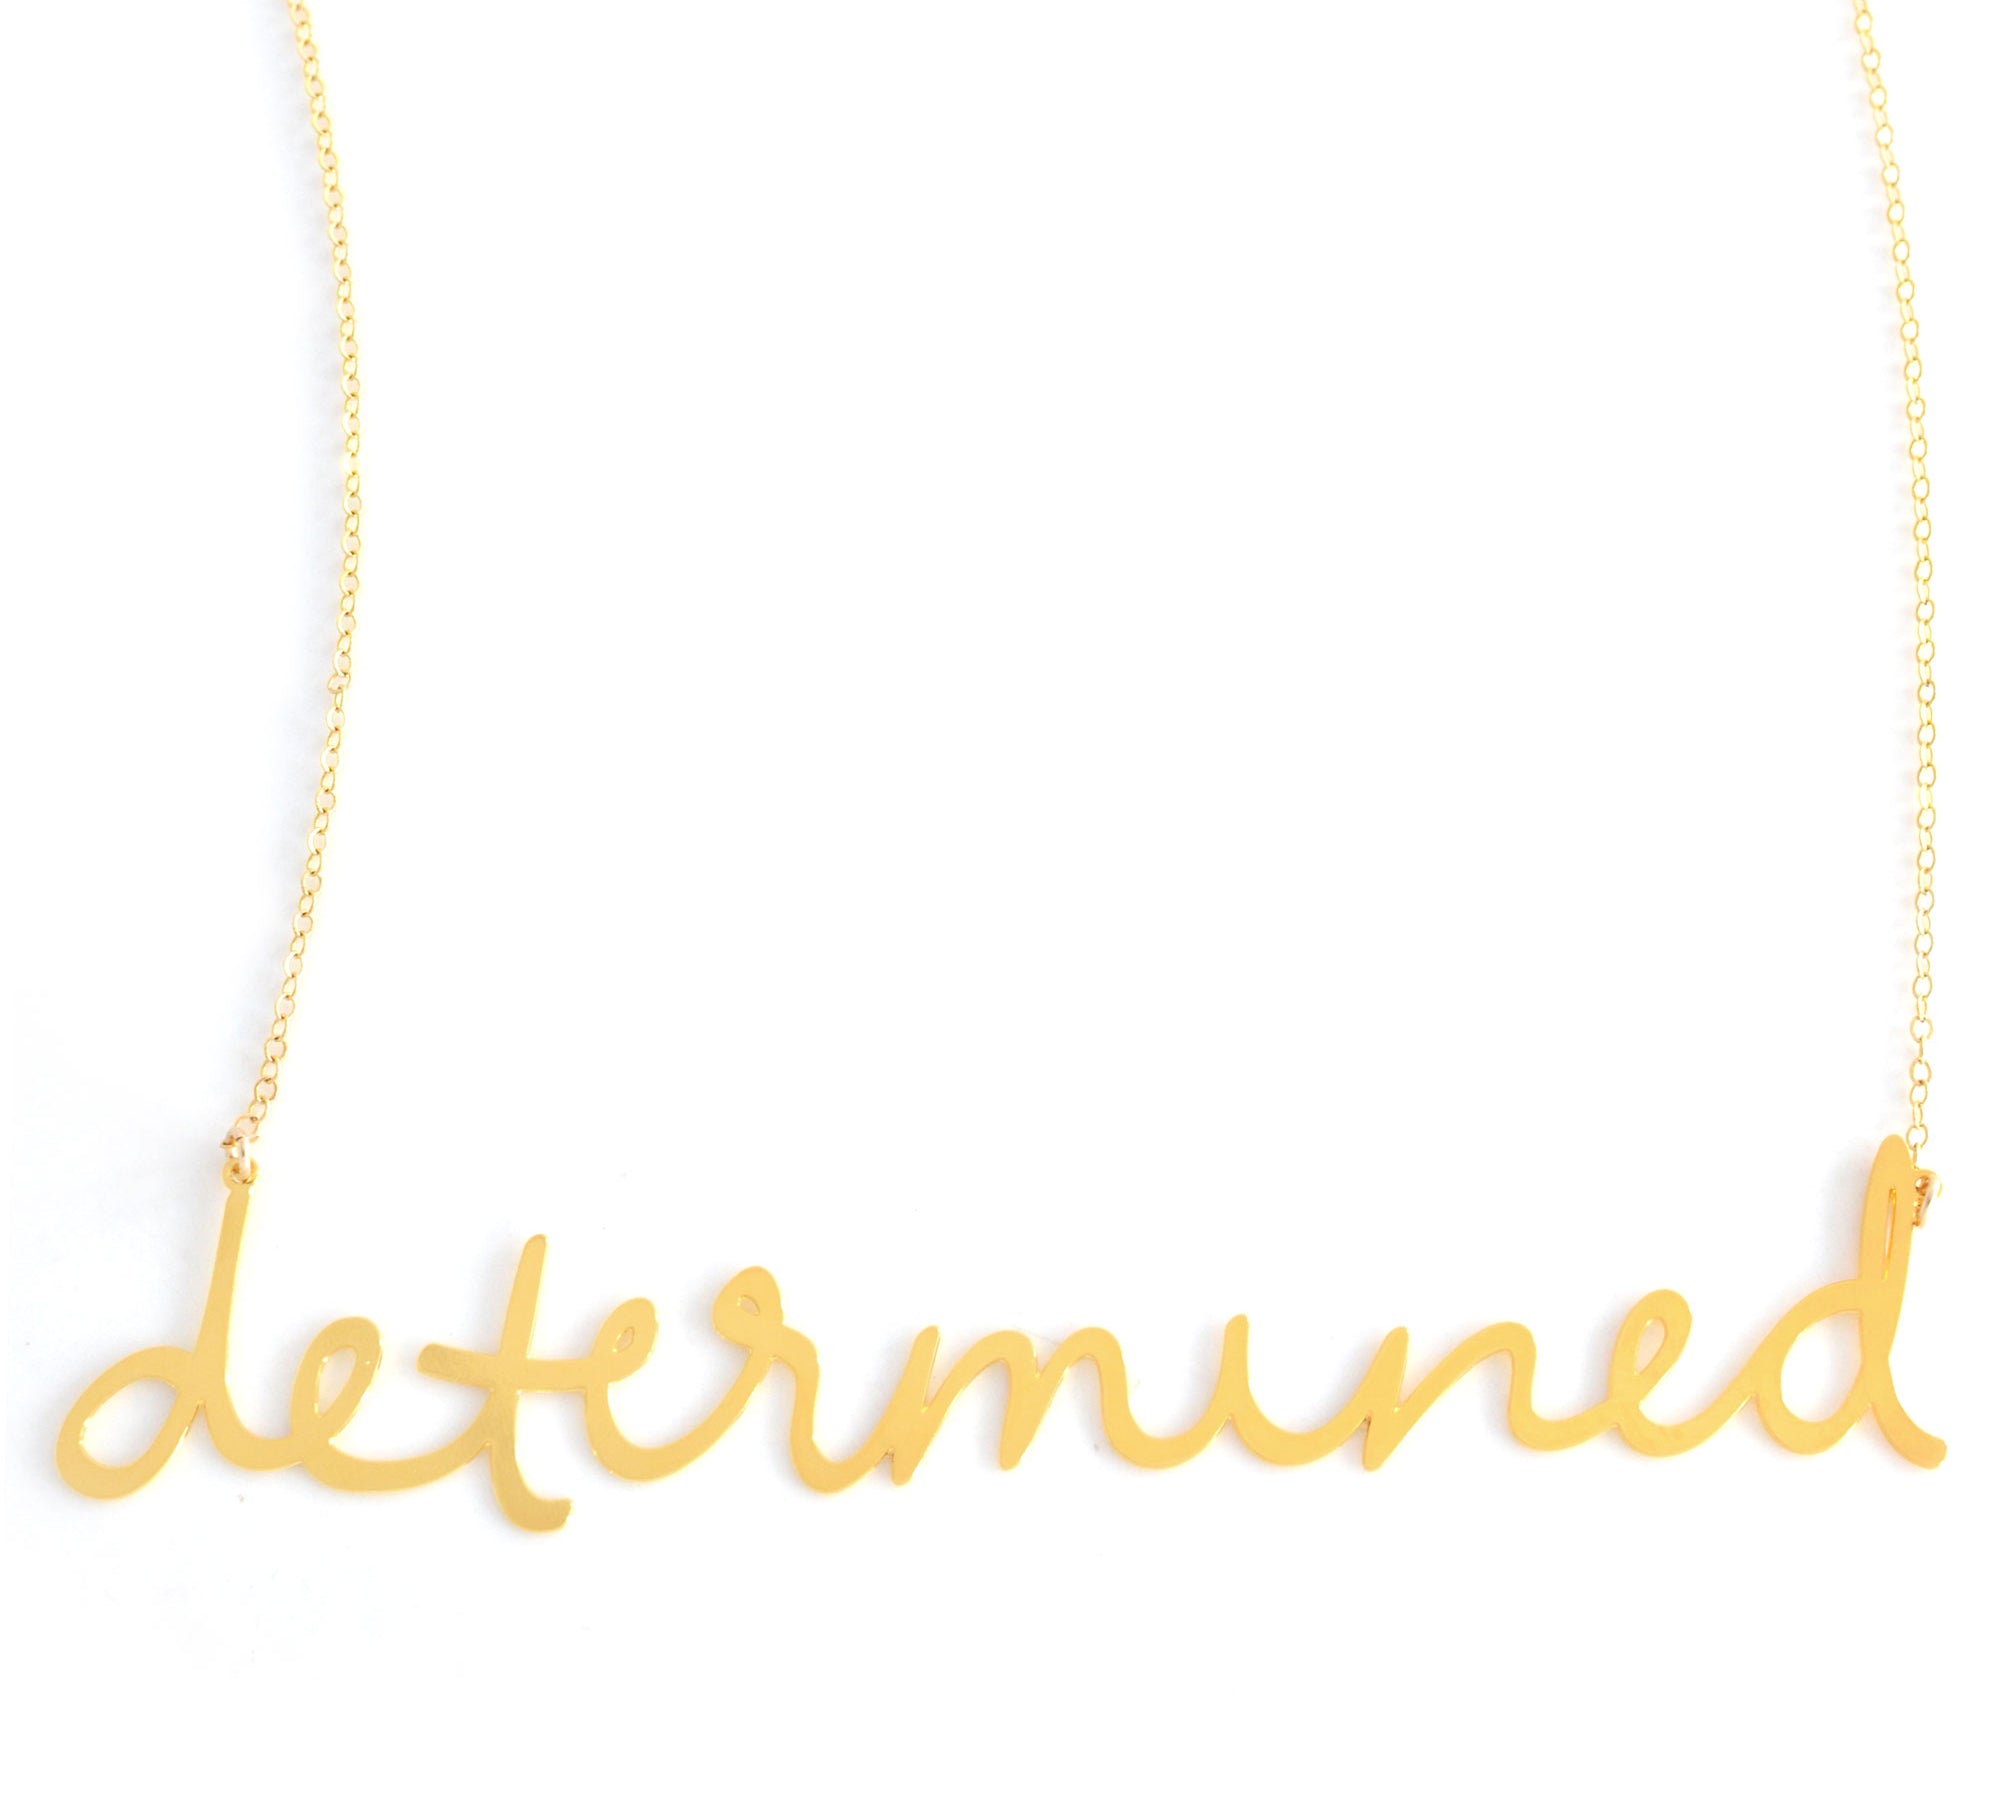 Determined Necklace - High Quality, Affordable, Hand Written, Empowering, Self Love, Mantra Word Necklace - Available in Gold and Silver - Small and Large Sizes - Made in USA - Brevity Jewelry